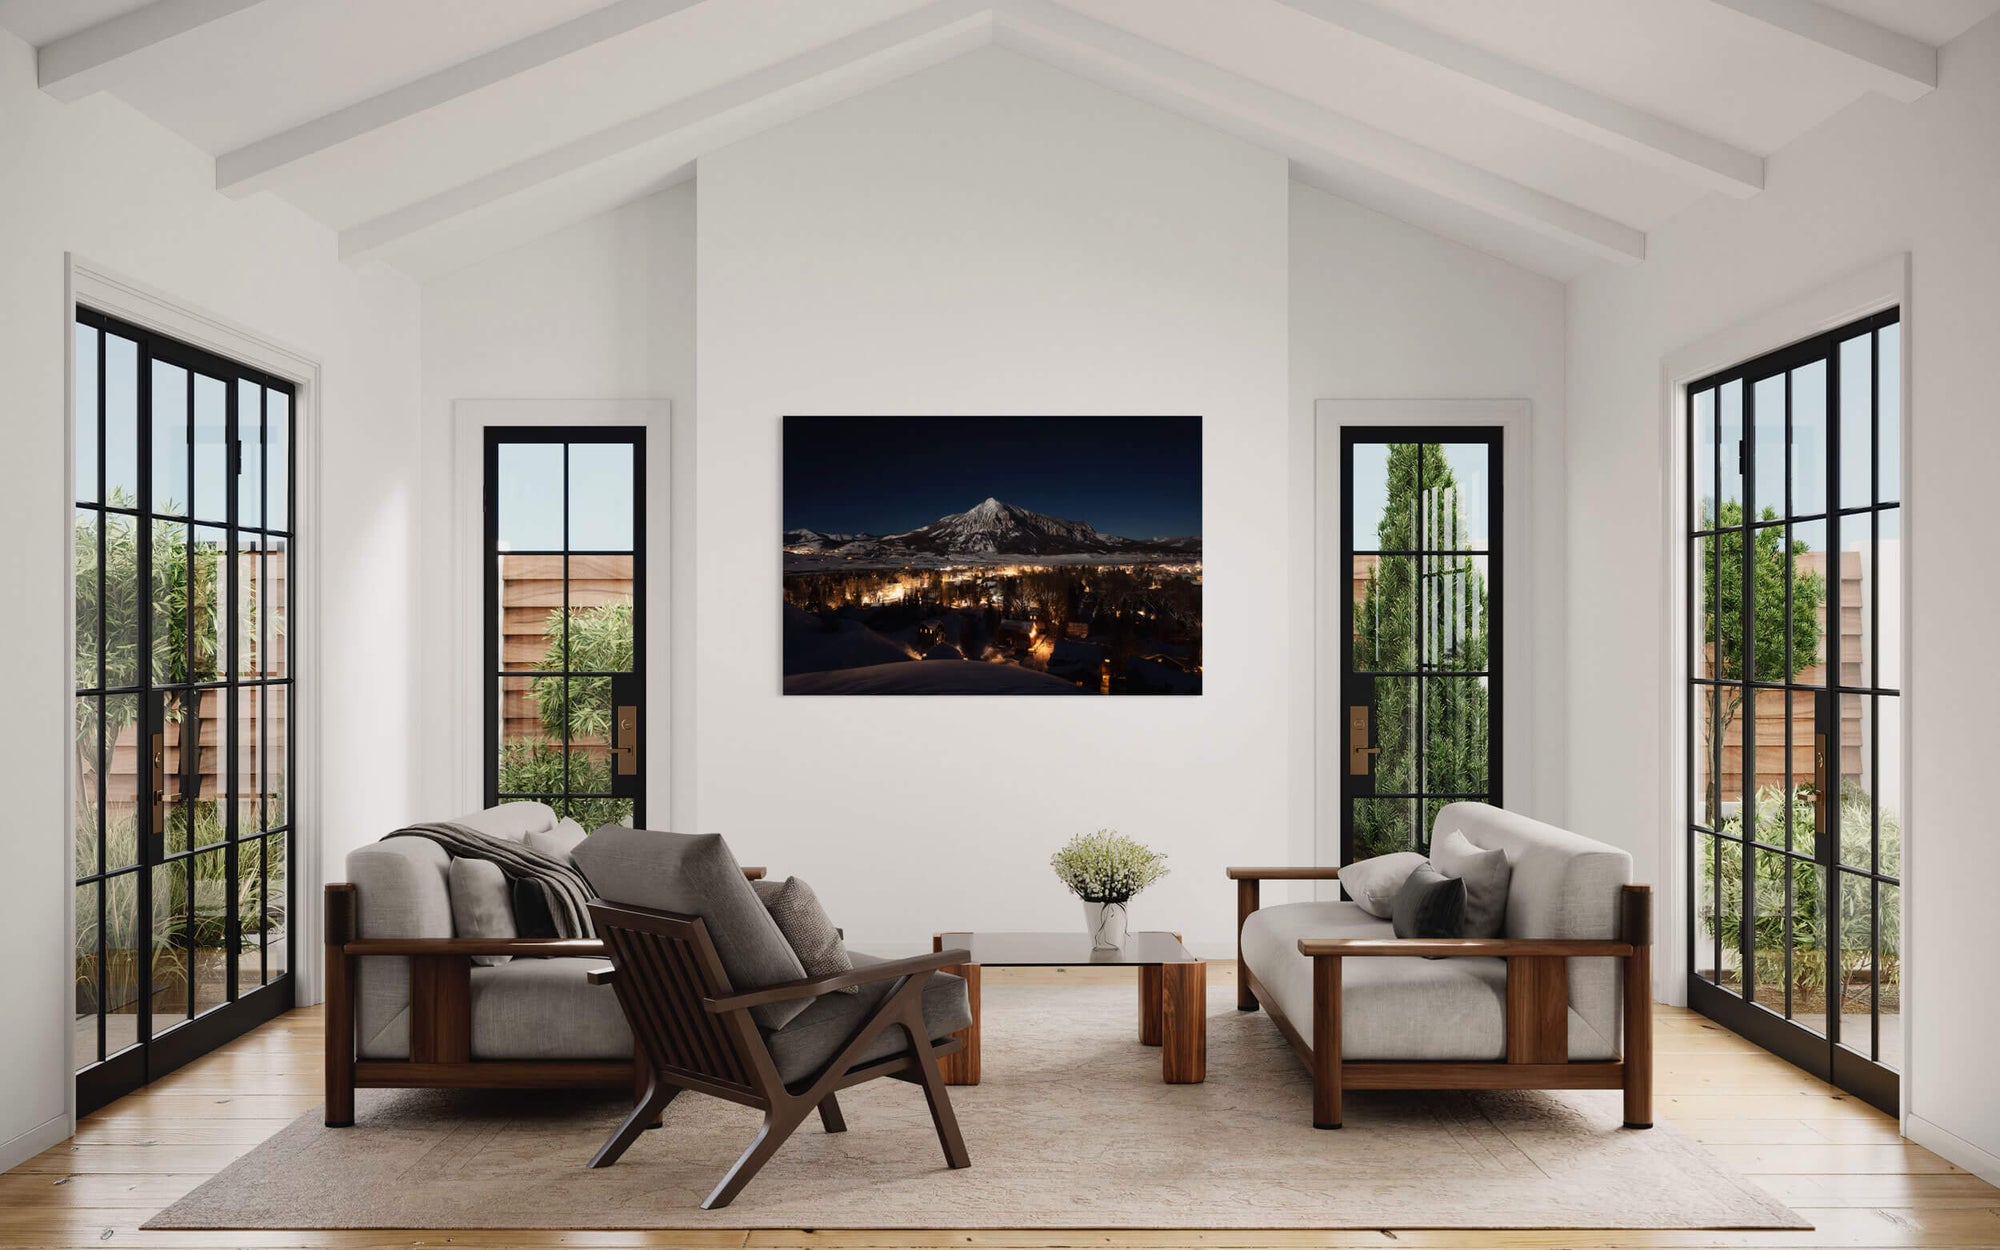 This Crested Butte picture showing the Colorado mountain town at night hangs in a living room.